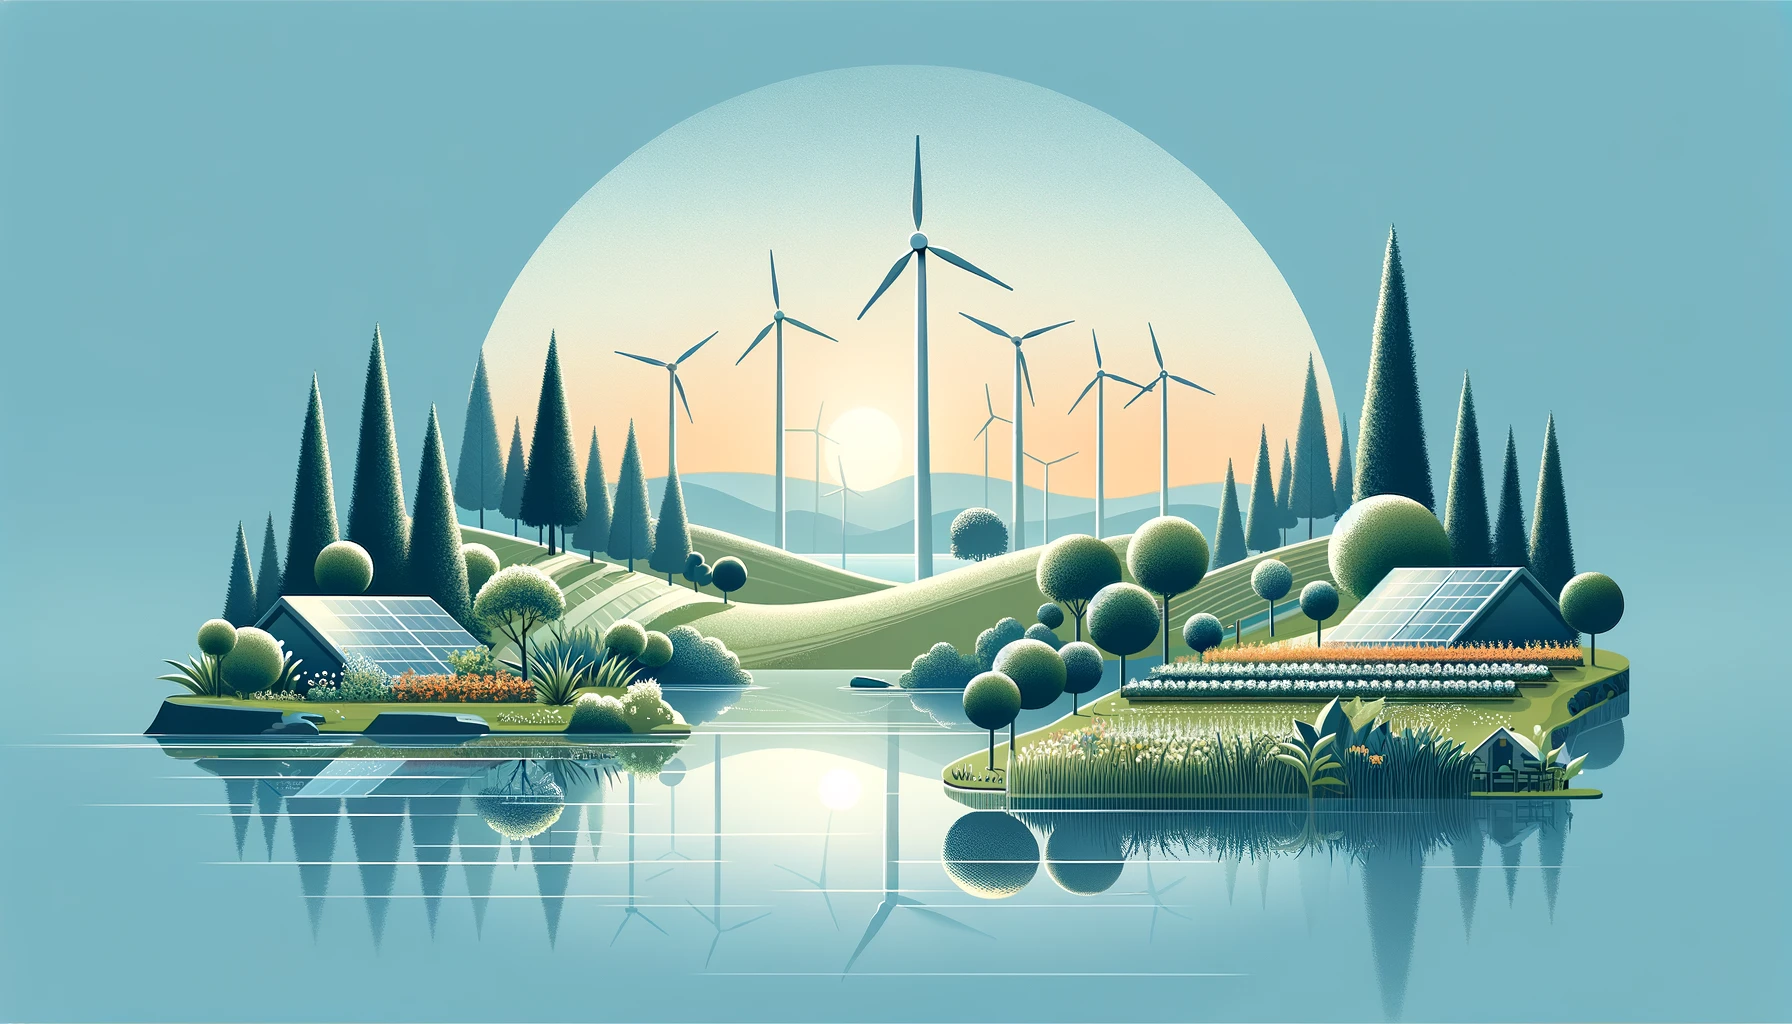 A tranquil landscape showcasing sustainable living with wind turbines and solar panels in the background, and a lush garden in the foreground, symbolizing renewable energy and sustainable agriculture under a clear blue sky